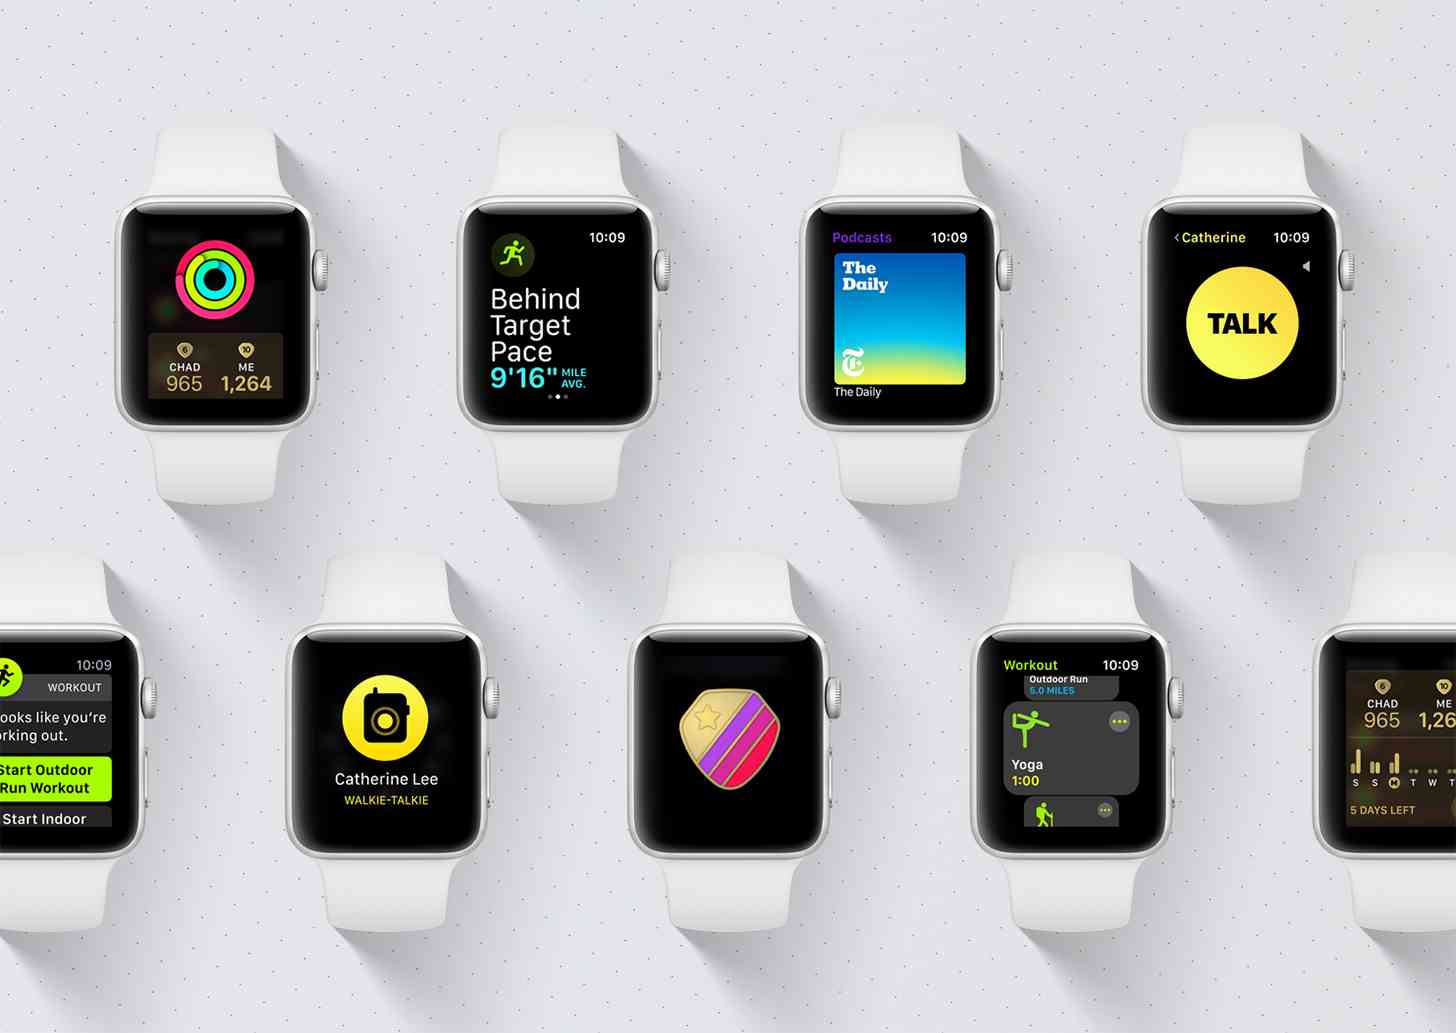 watchOS 5 features official